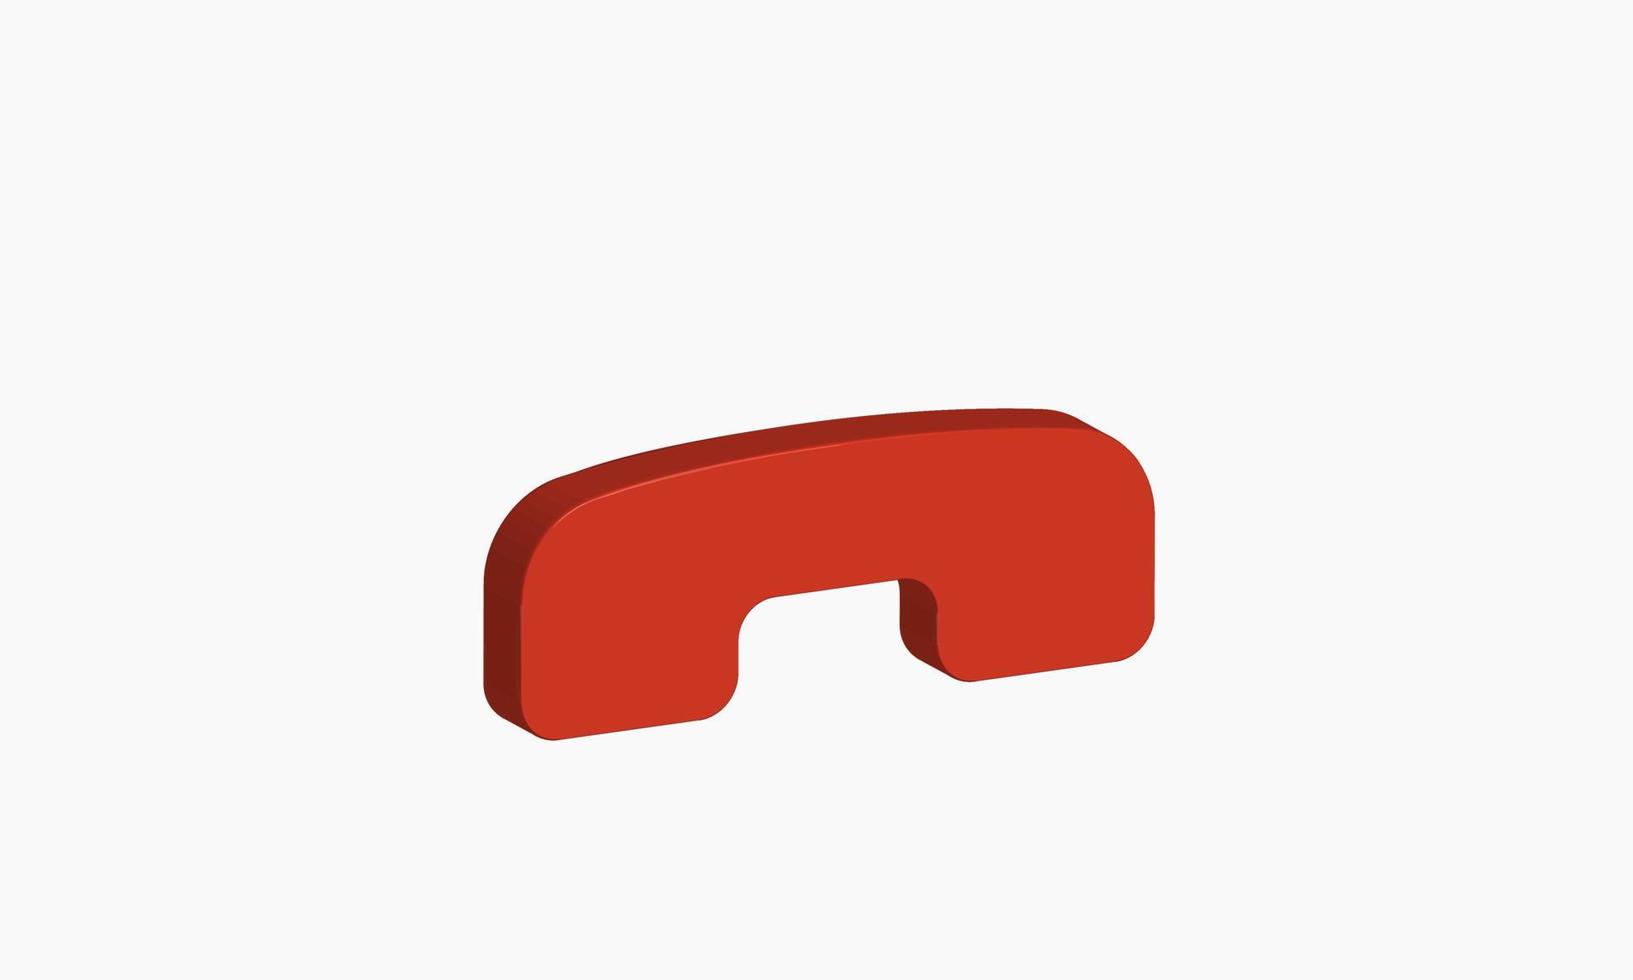 illustration realistic vector icon symbol red phone call 3d creative isolated on background